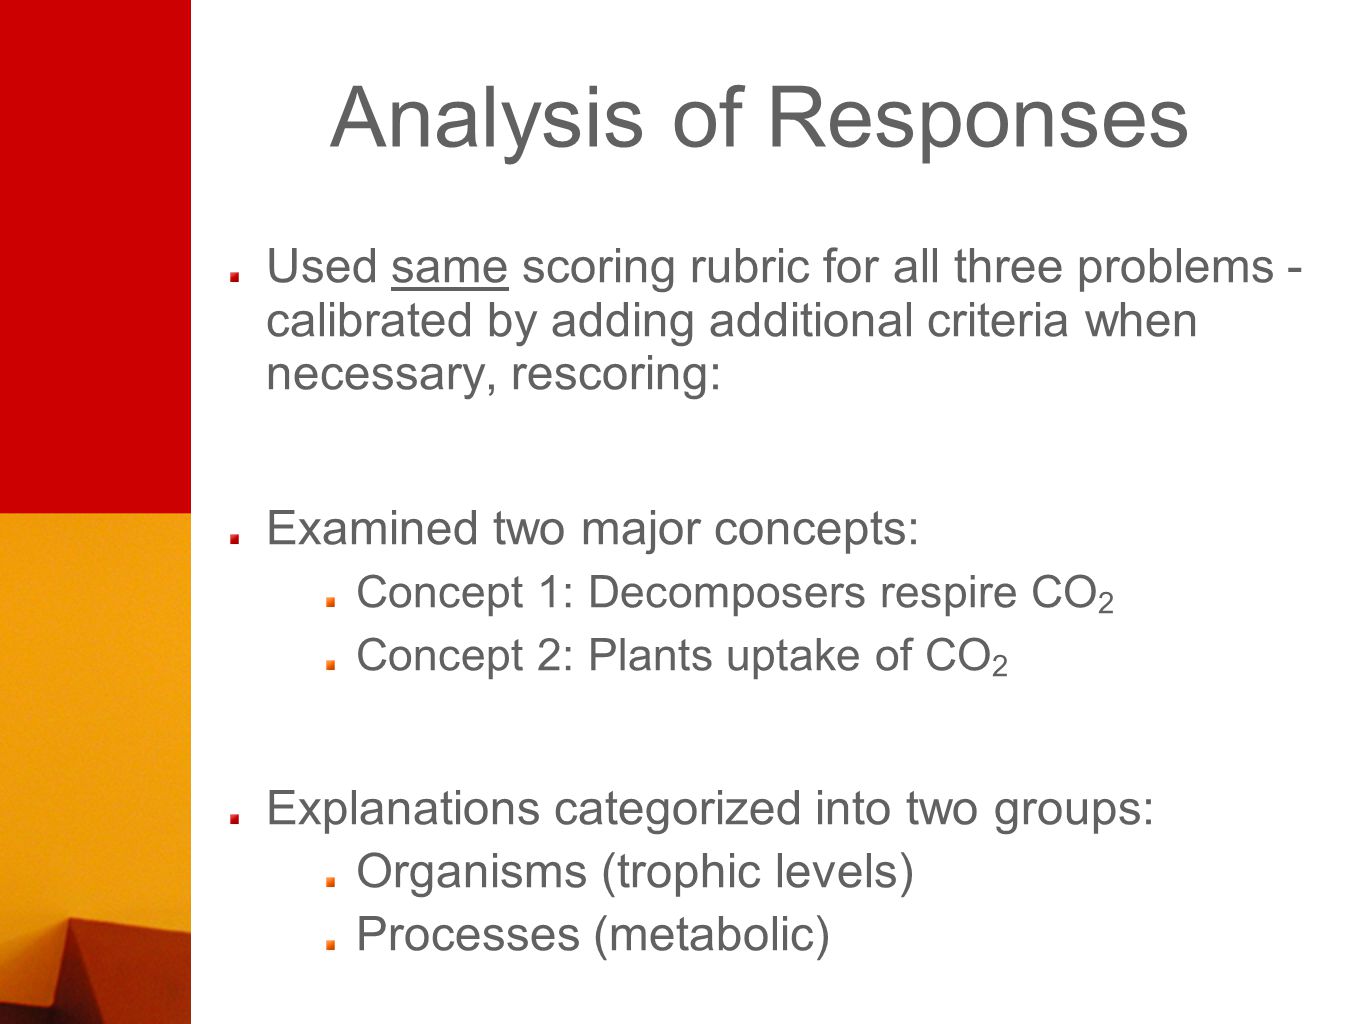 Analysis of Responses Used same scoring rubric for all three problems - calibrated by adding additional criteria when necessary, rescoring: Examined two major concepts: Concept 1: Decomposers respire CO 2 Concept 2: Plants uptake of CO 2 Explanations categorized into two groups: Organisms (trophic levels) Processes (metabolic)